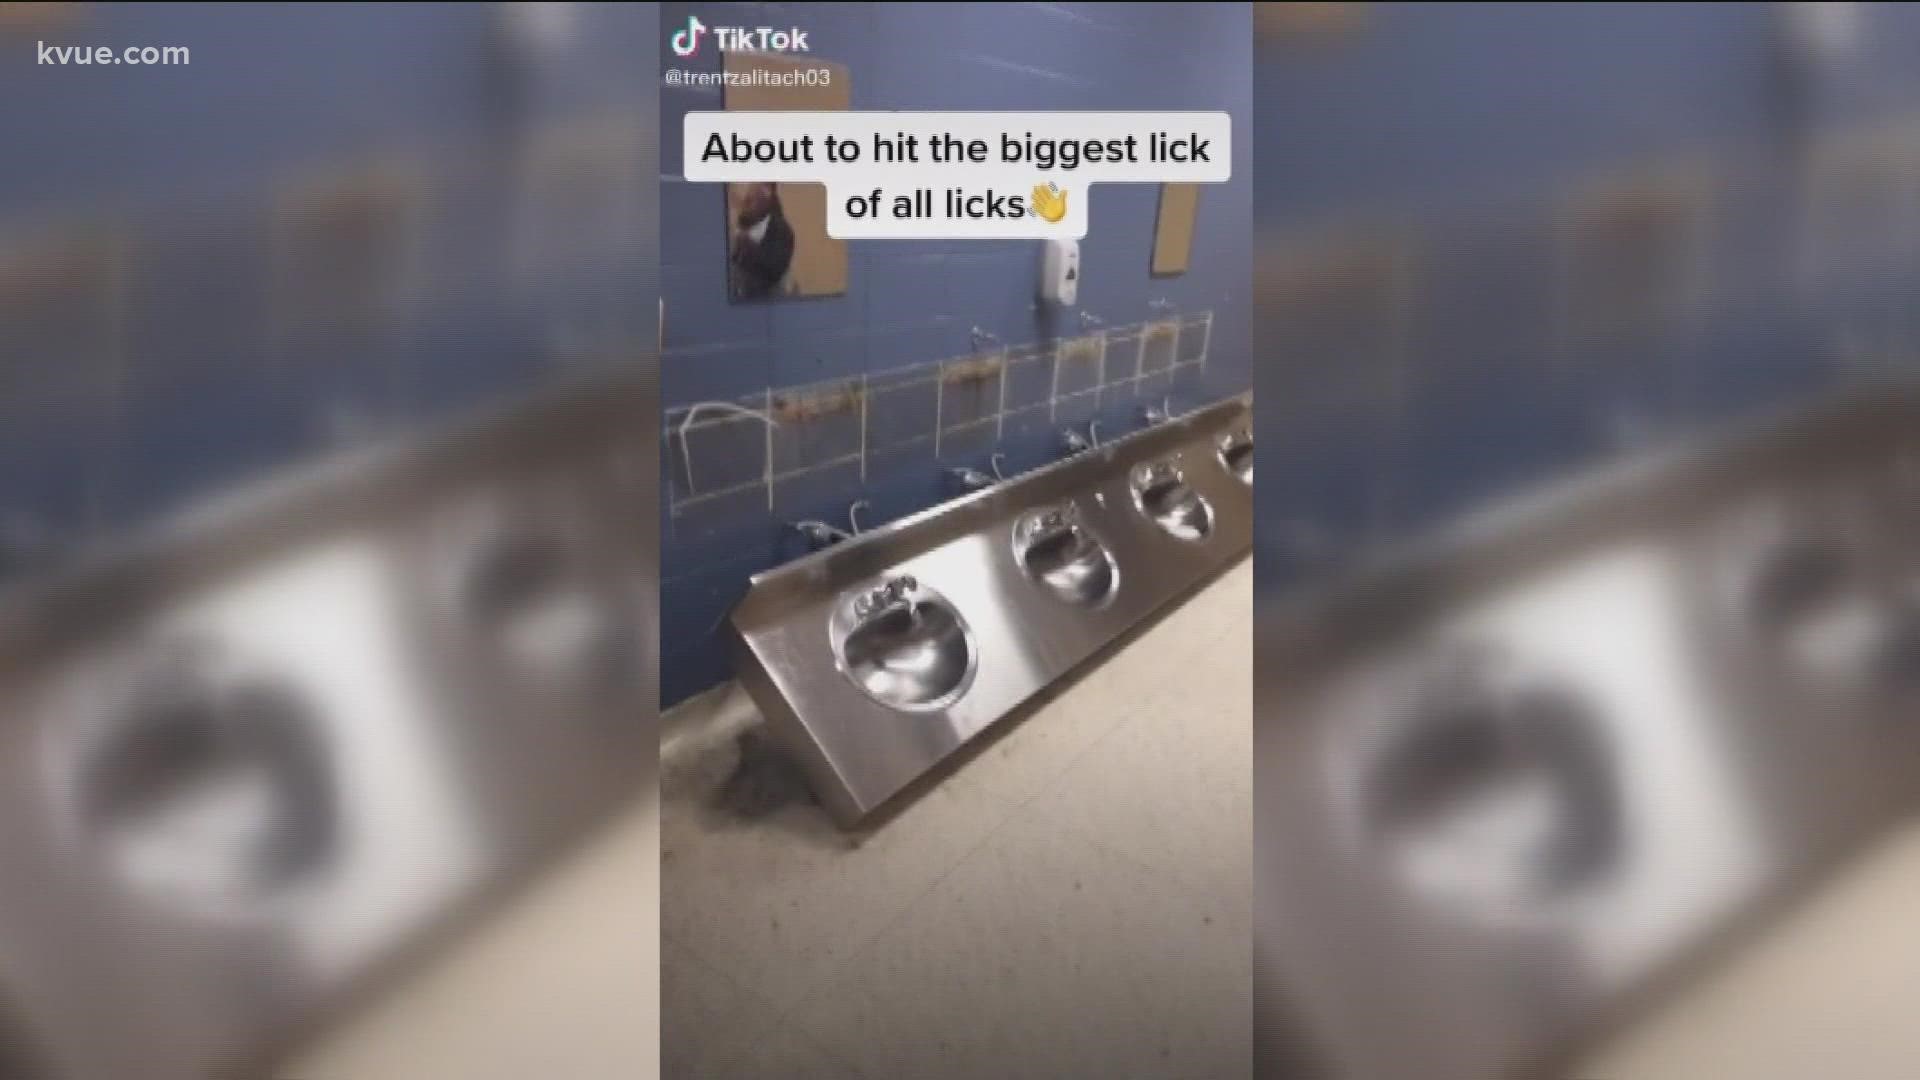 There's a new TikTok trend that parents should hear about. Here's what you need to know about "devious licks."